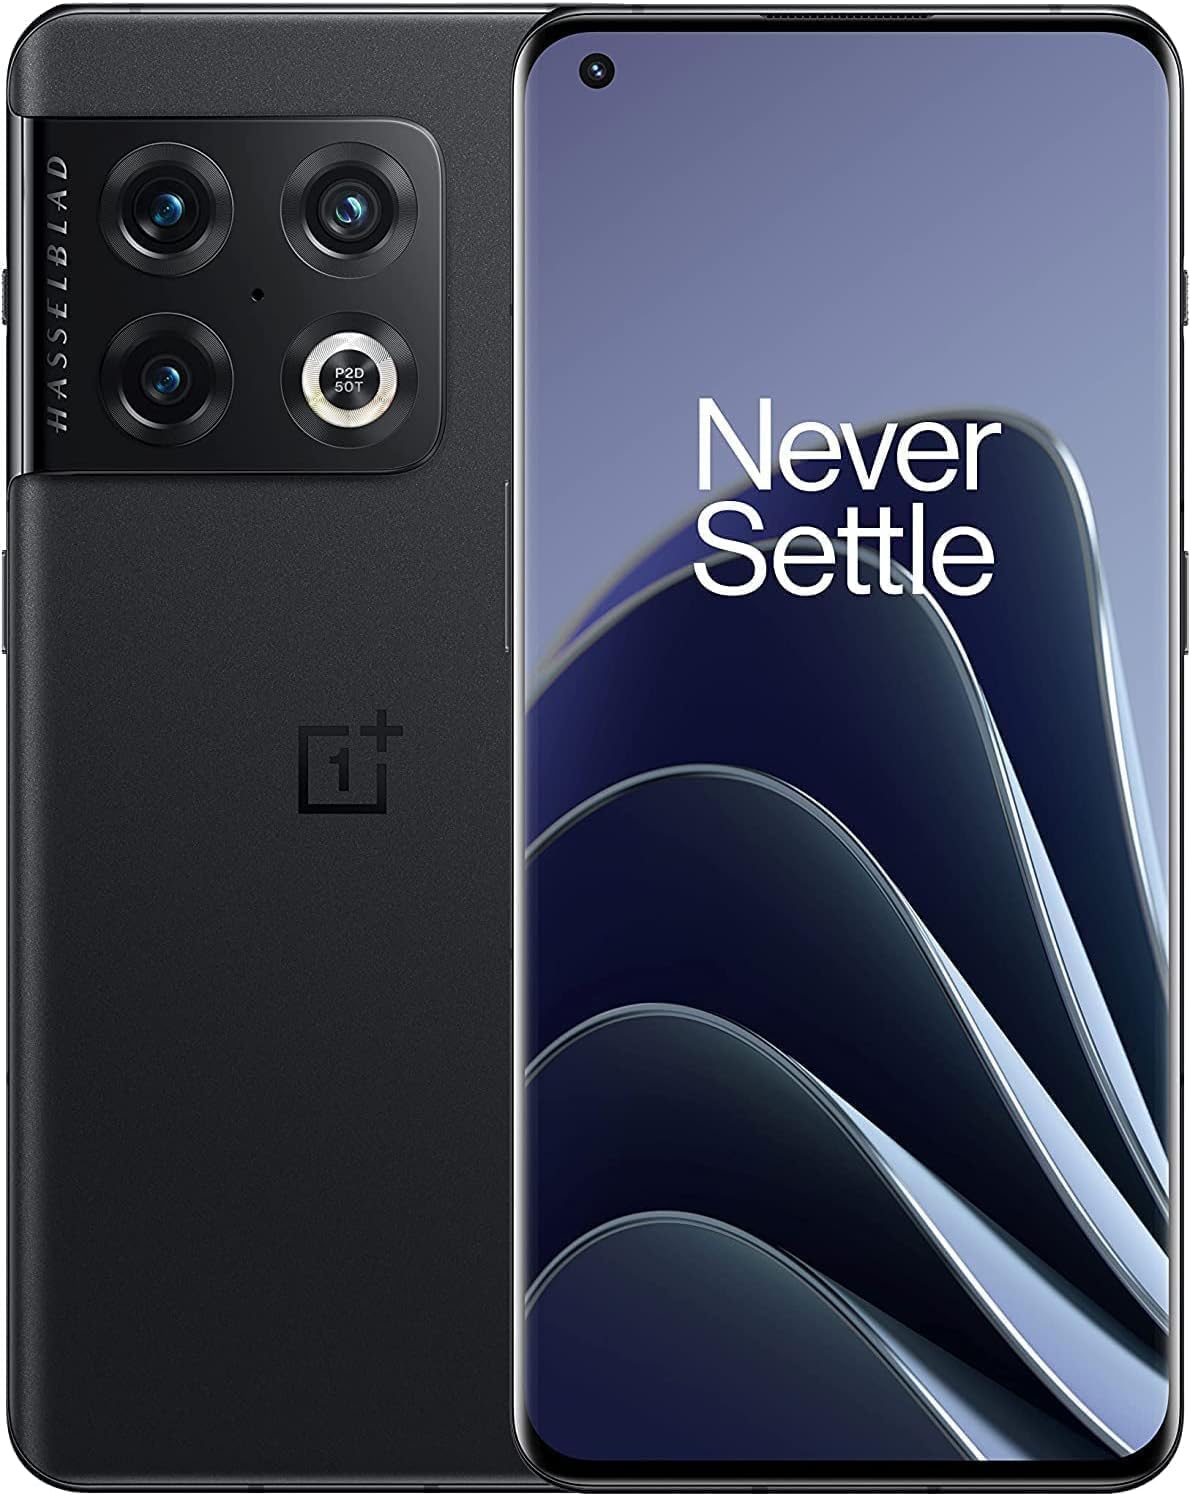 OnePlus 10 Pro 5G, 128GB+8GB RAM, Single SIM, T-Mobile Unlocked Android Smartphone 6.7" 120Hz LTPO 2.0 Display, HyperBoost Gaming Engine - Volcanic Black (with Generic Charger) (Renewed)